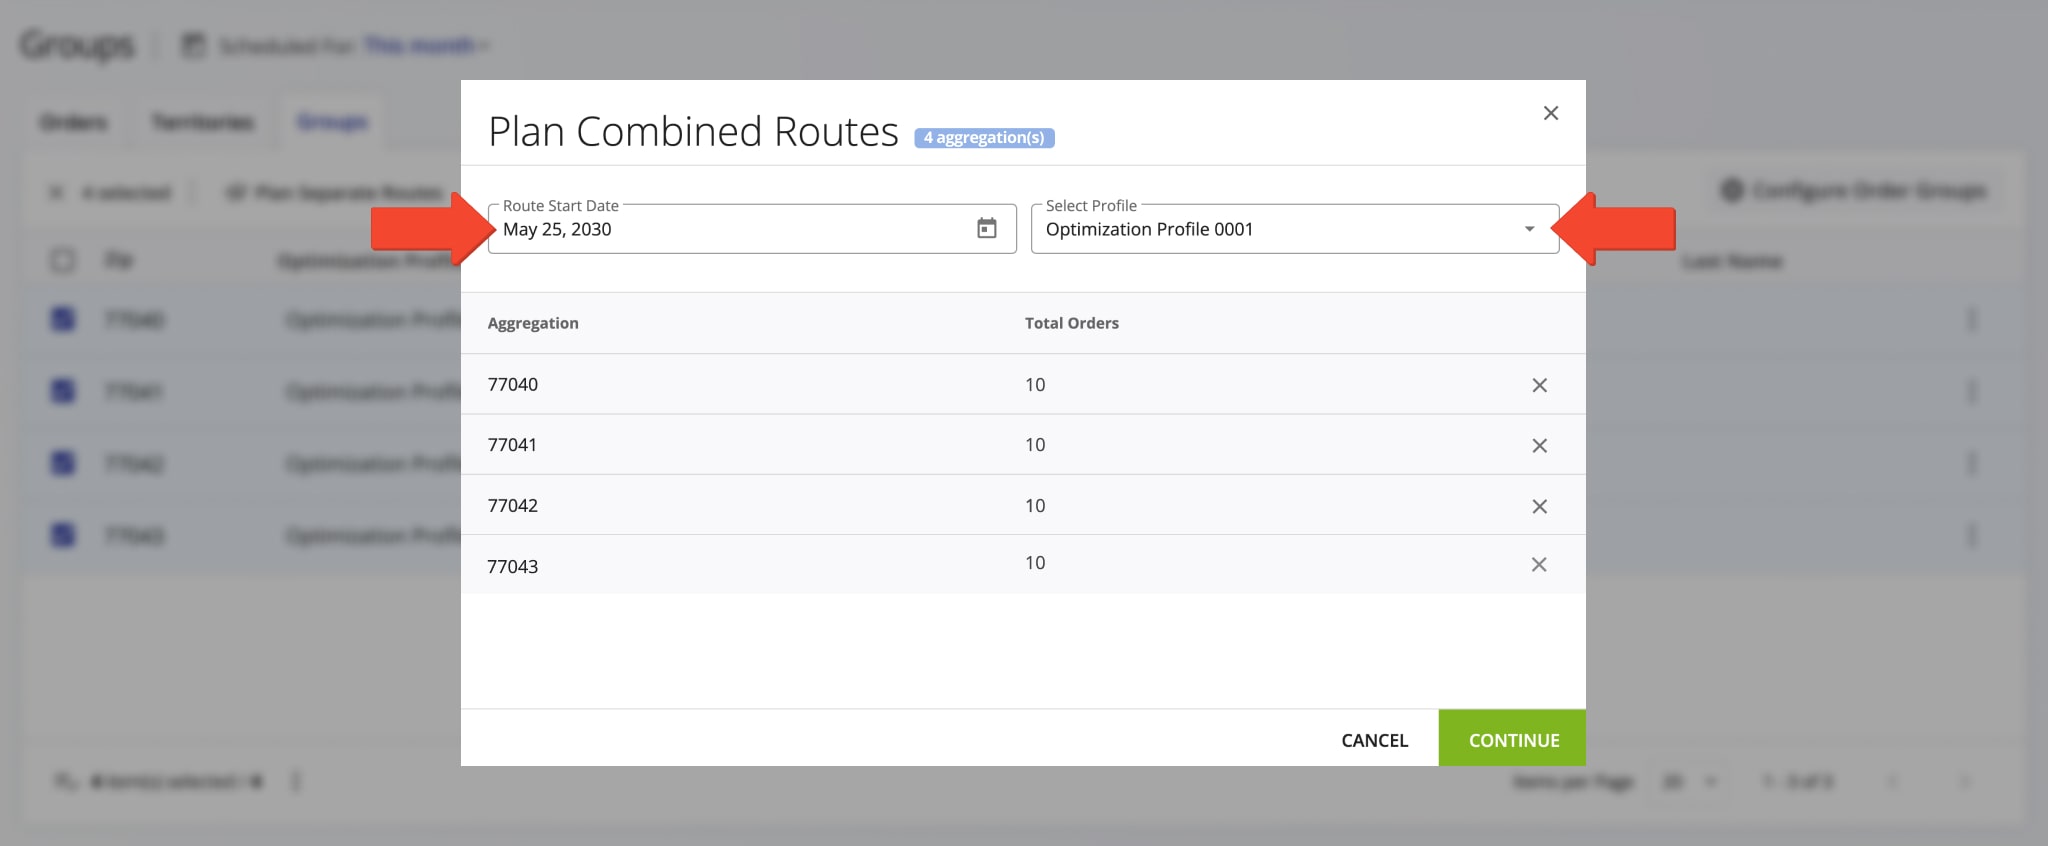 Scheduling route and selecting an Optimization Profile for planning and optimizing a combined route with all orders within the selected groups.